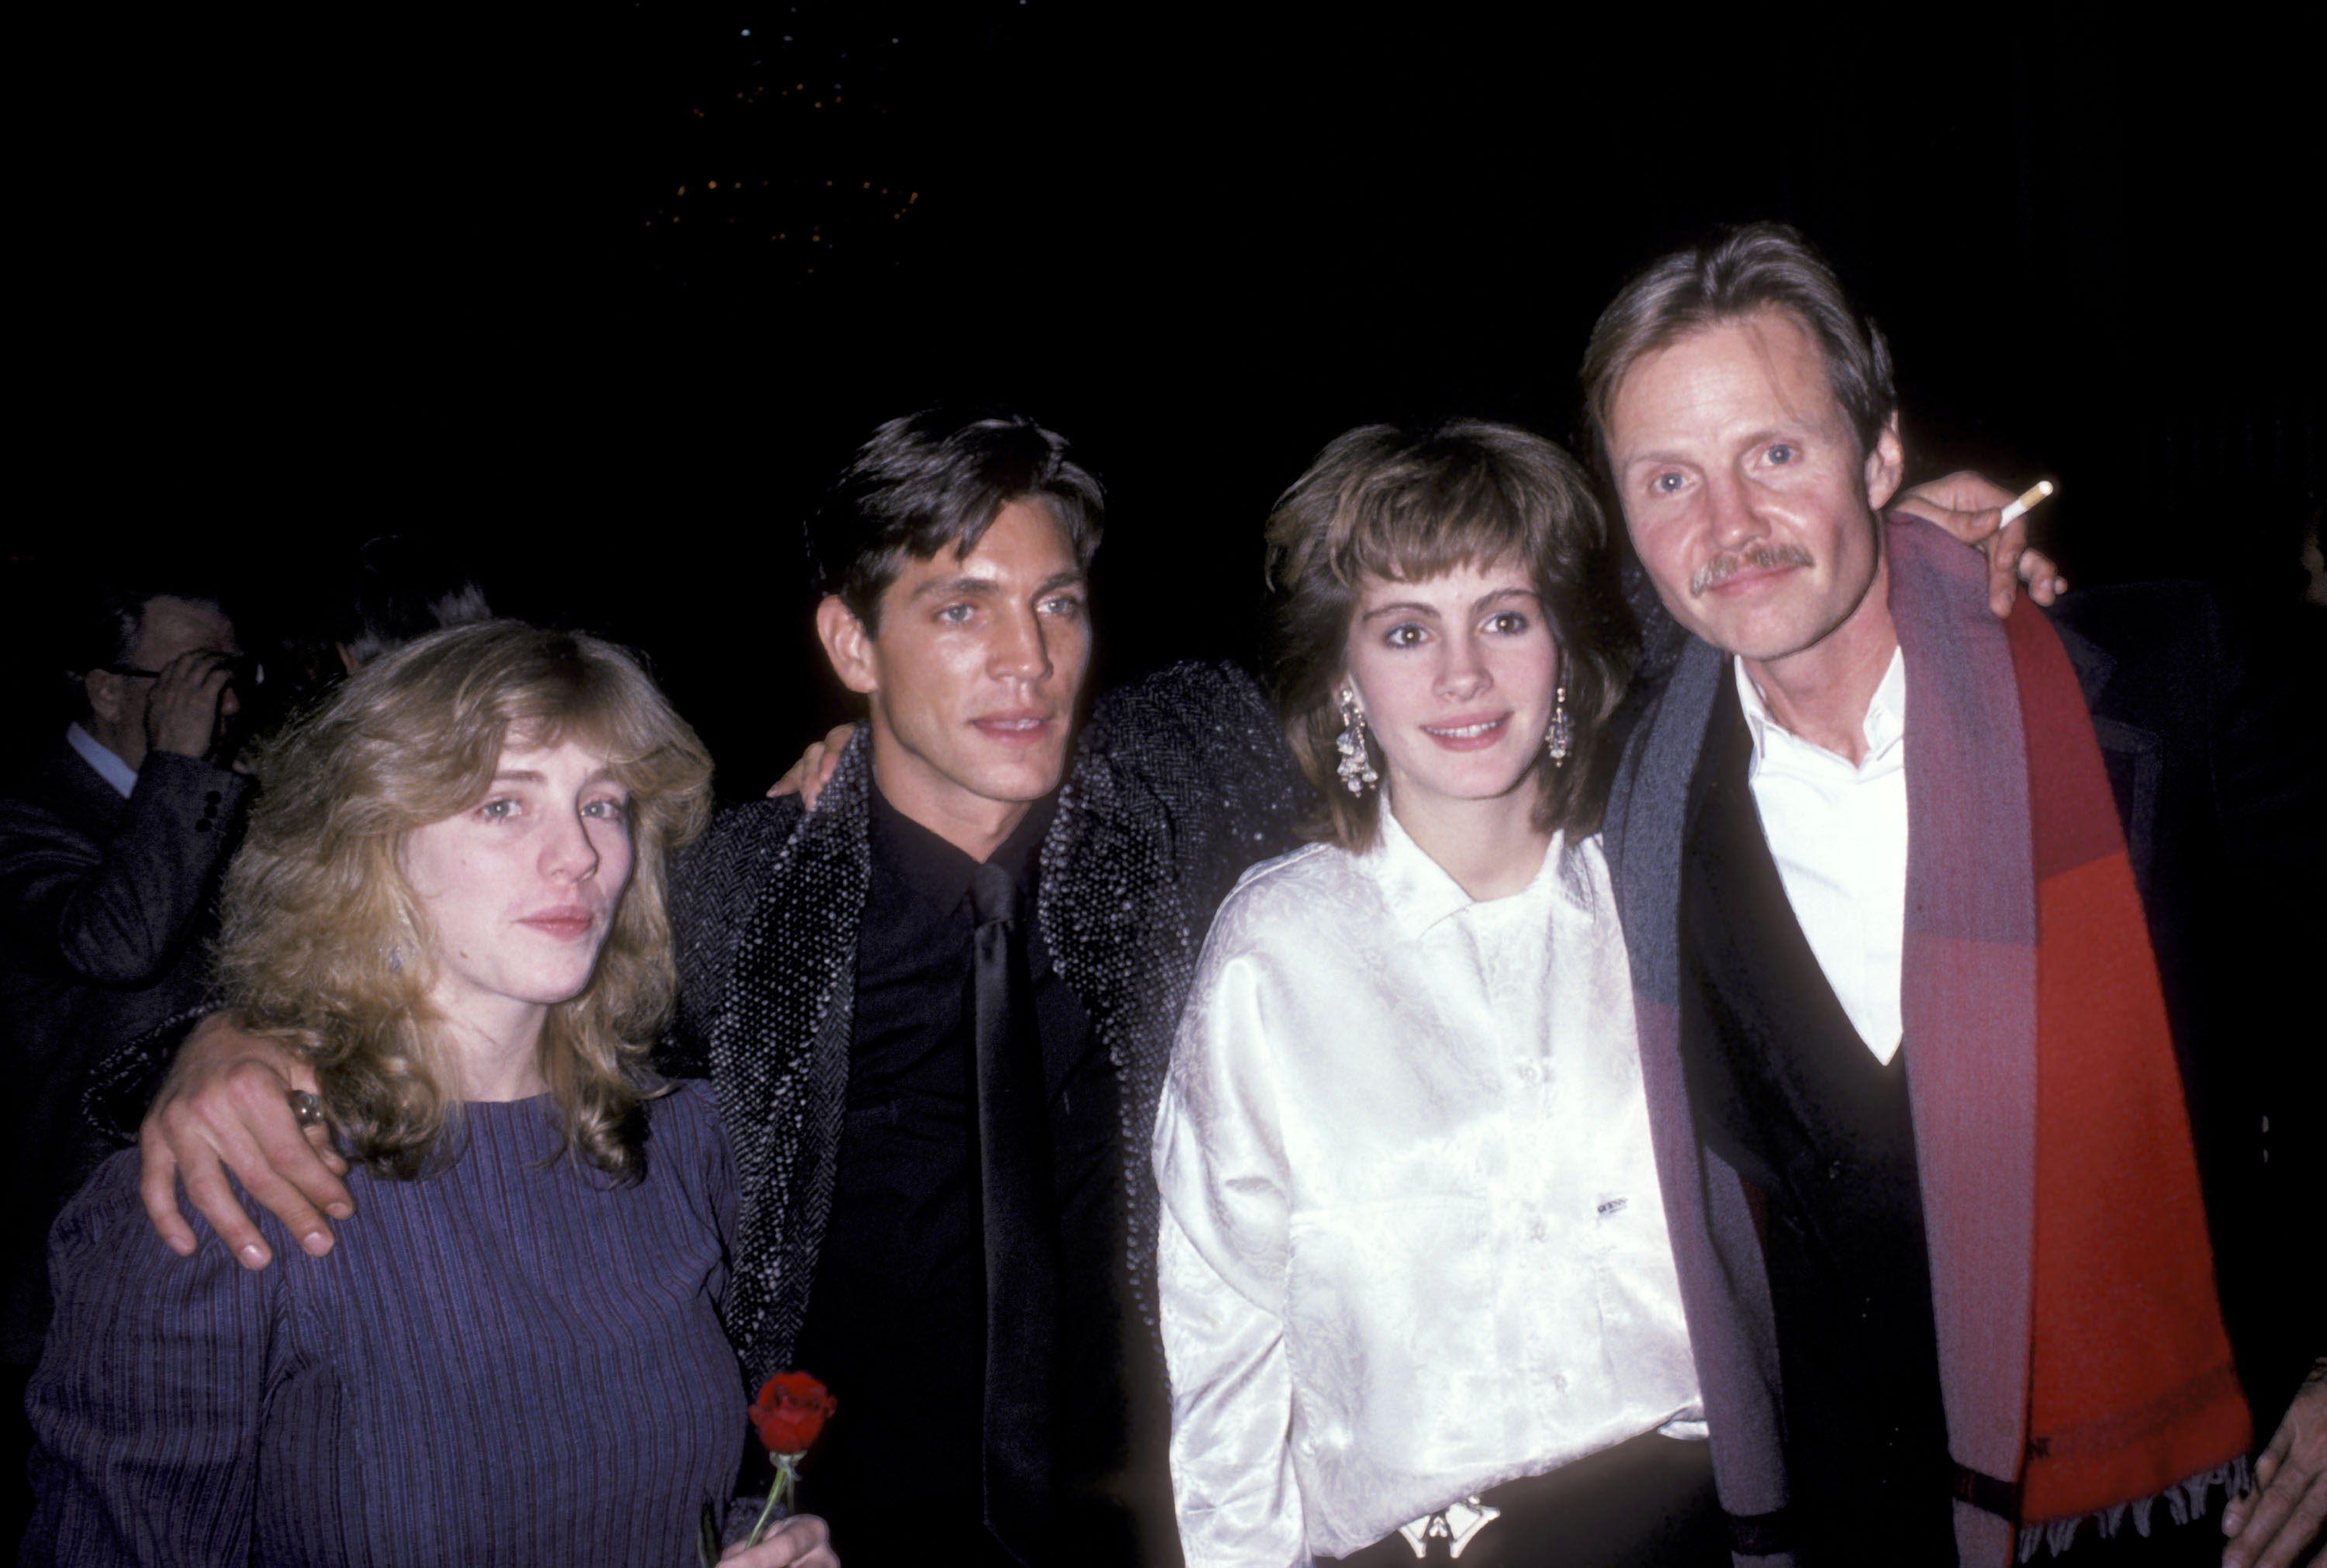 Eric Roberts, actress Julia Roberts and their sister Lisa Roberts and actor Jon Voight at The Plaza Hotel in New York City on December 4, 1985 | Source: Getty Images